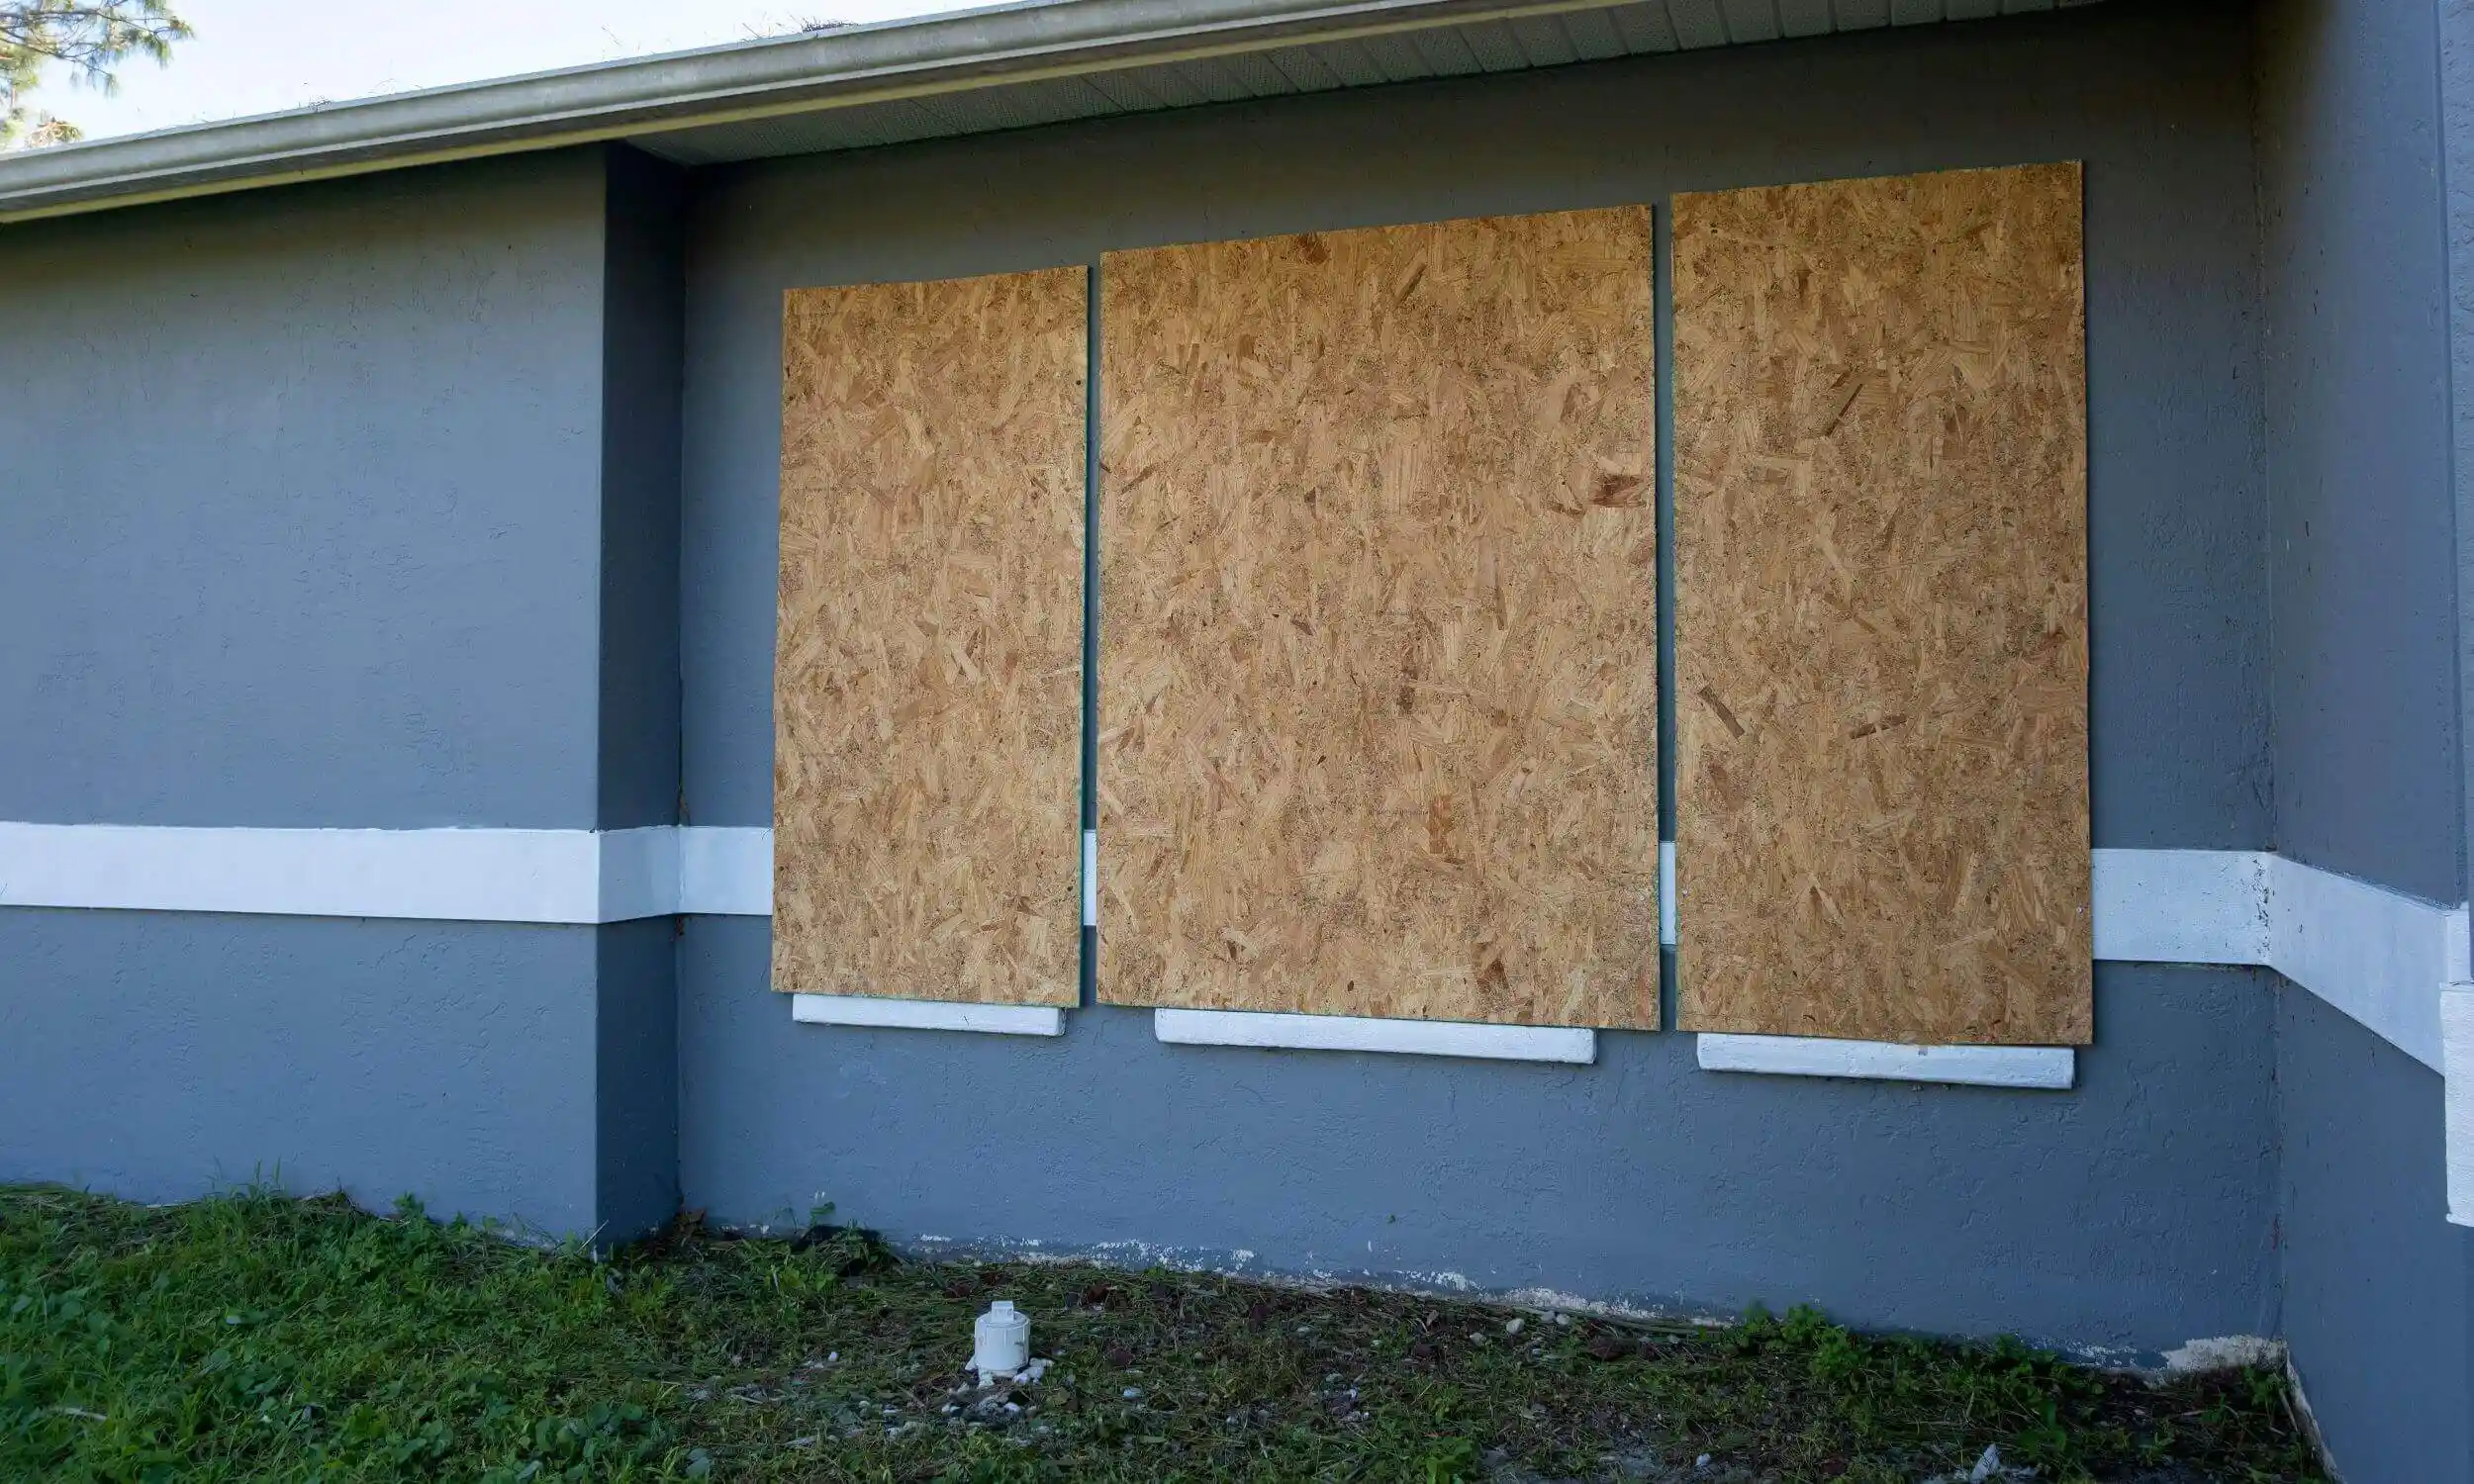 A business temporarily closed and with boarded-up windows.